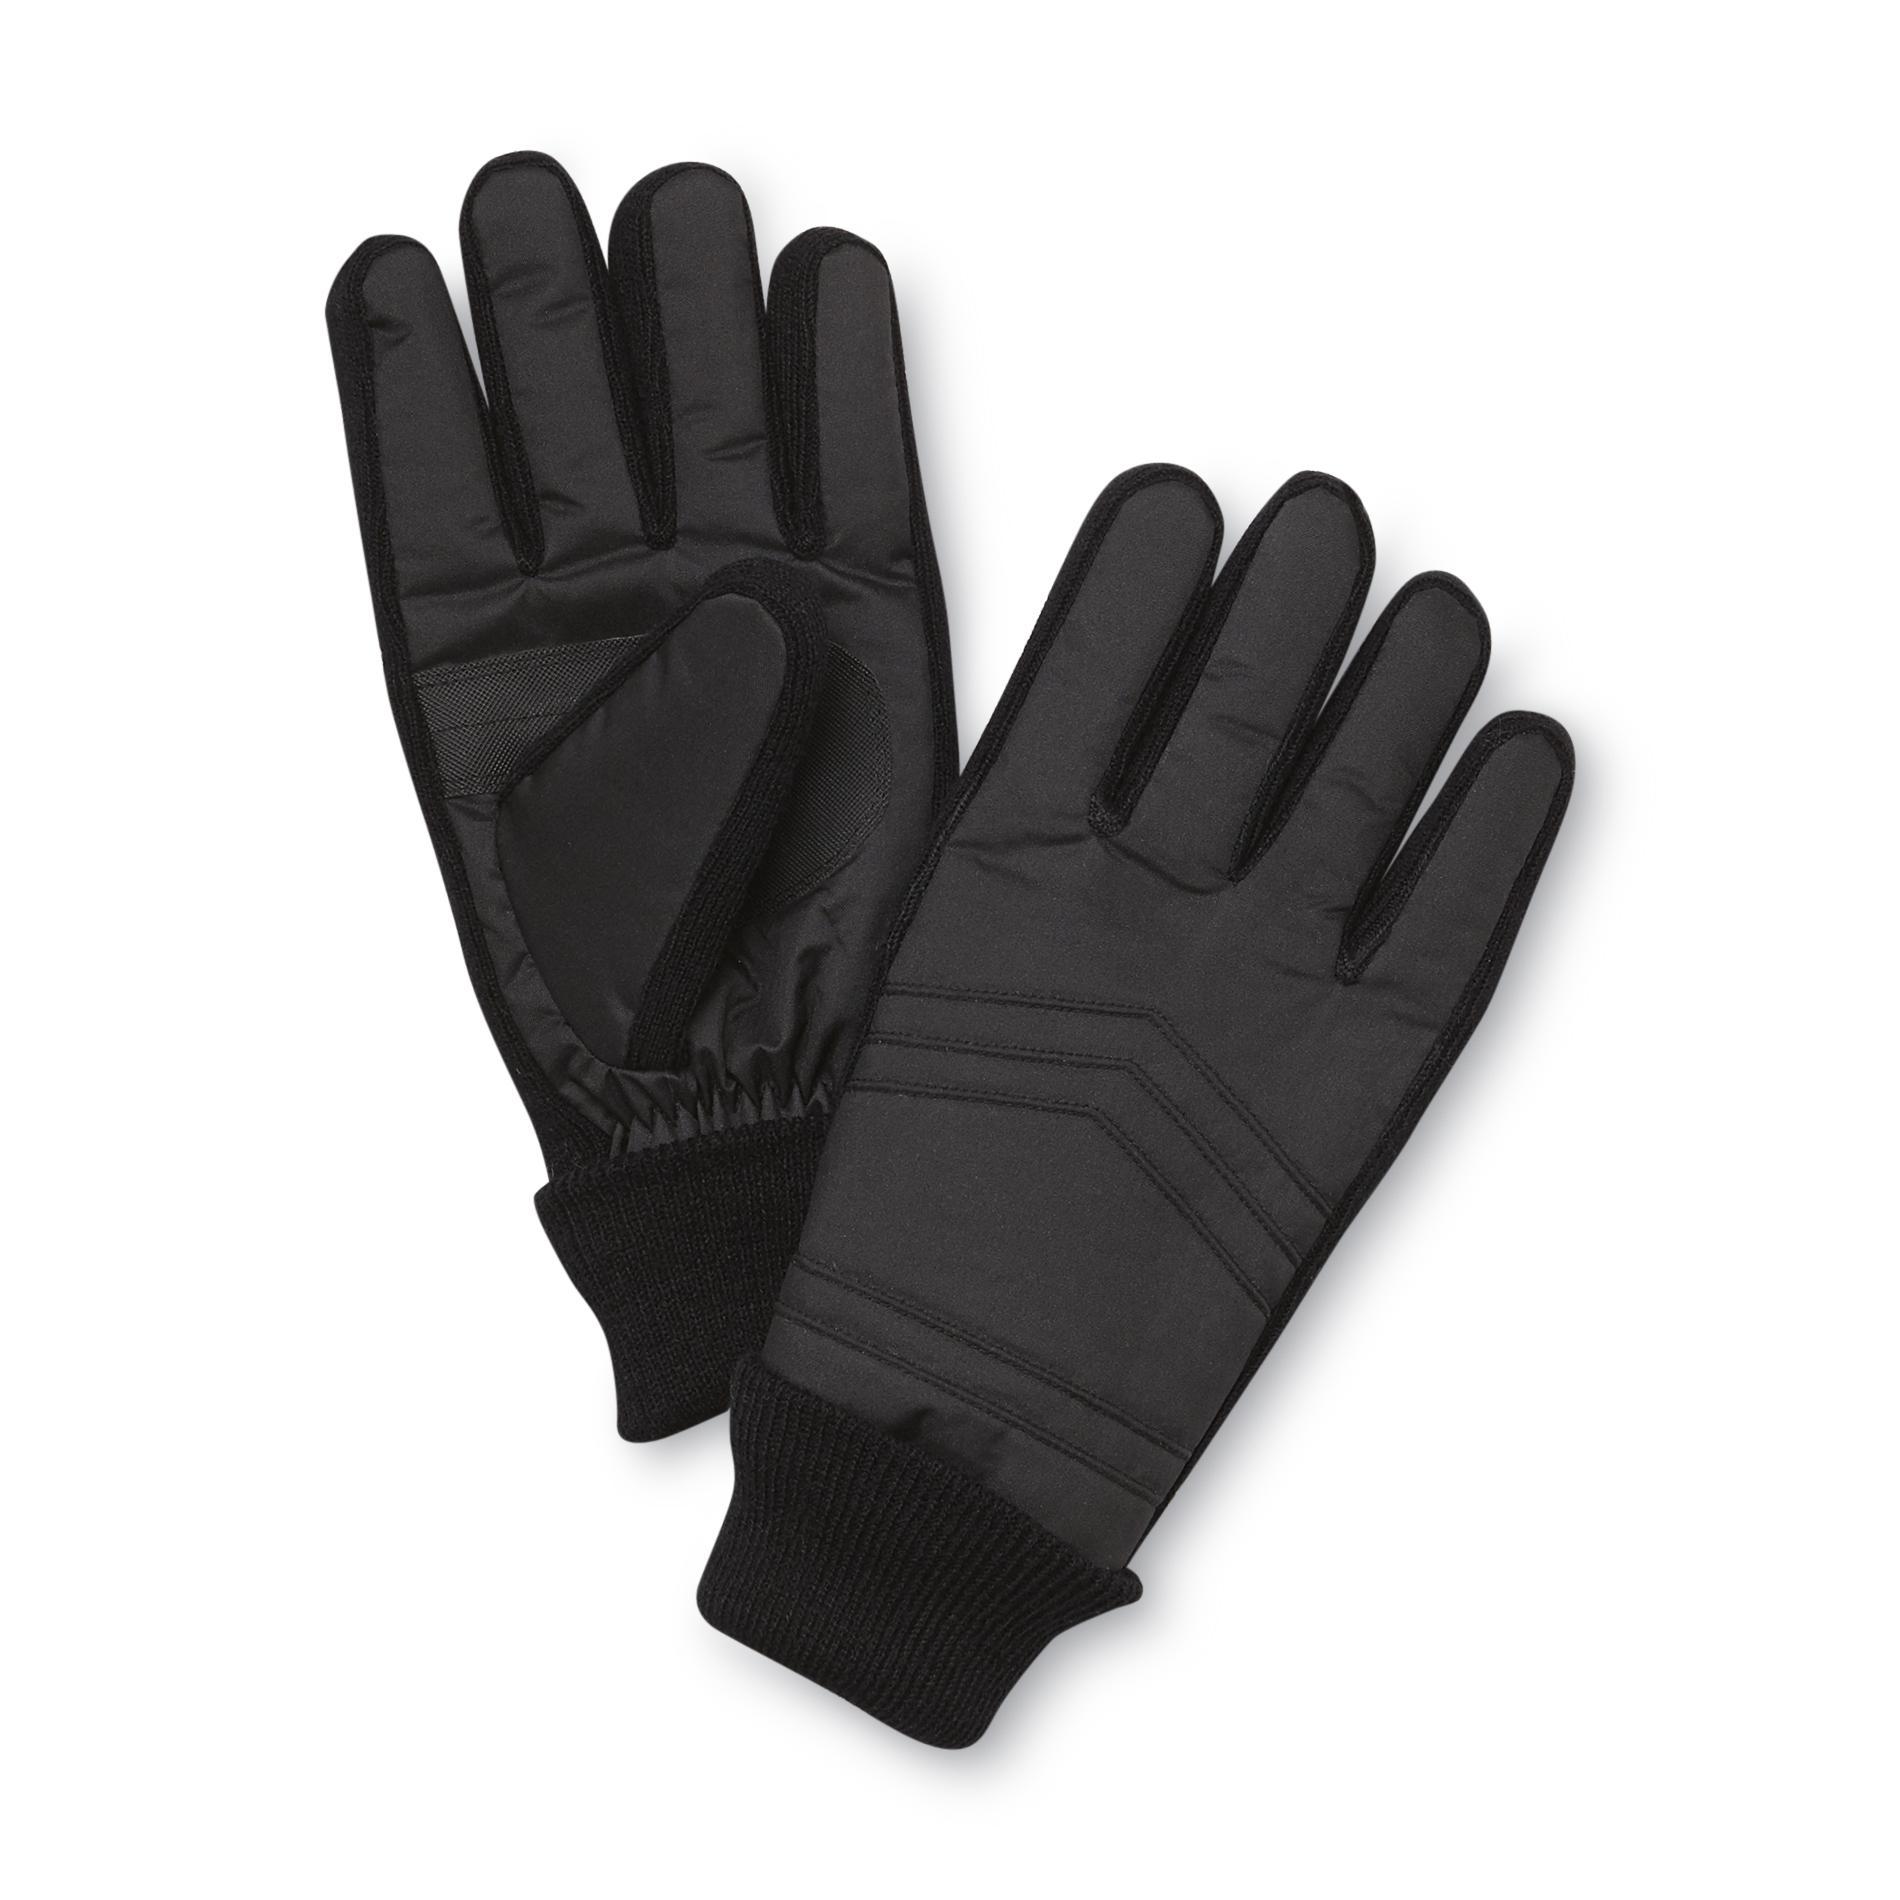 David Taylor Collection Men's Thinsulate Gloves